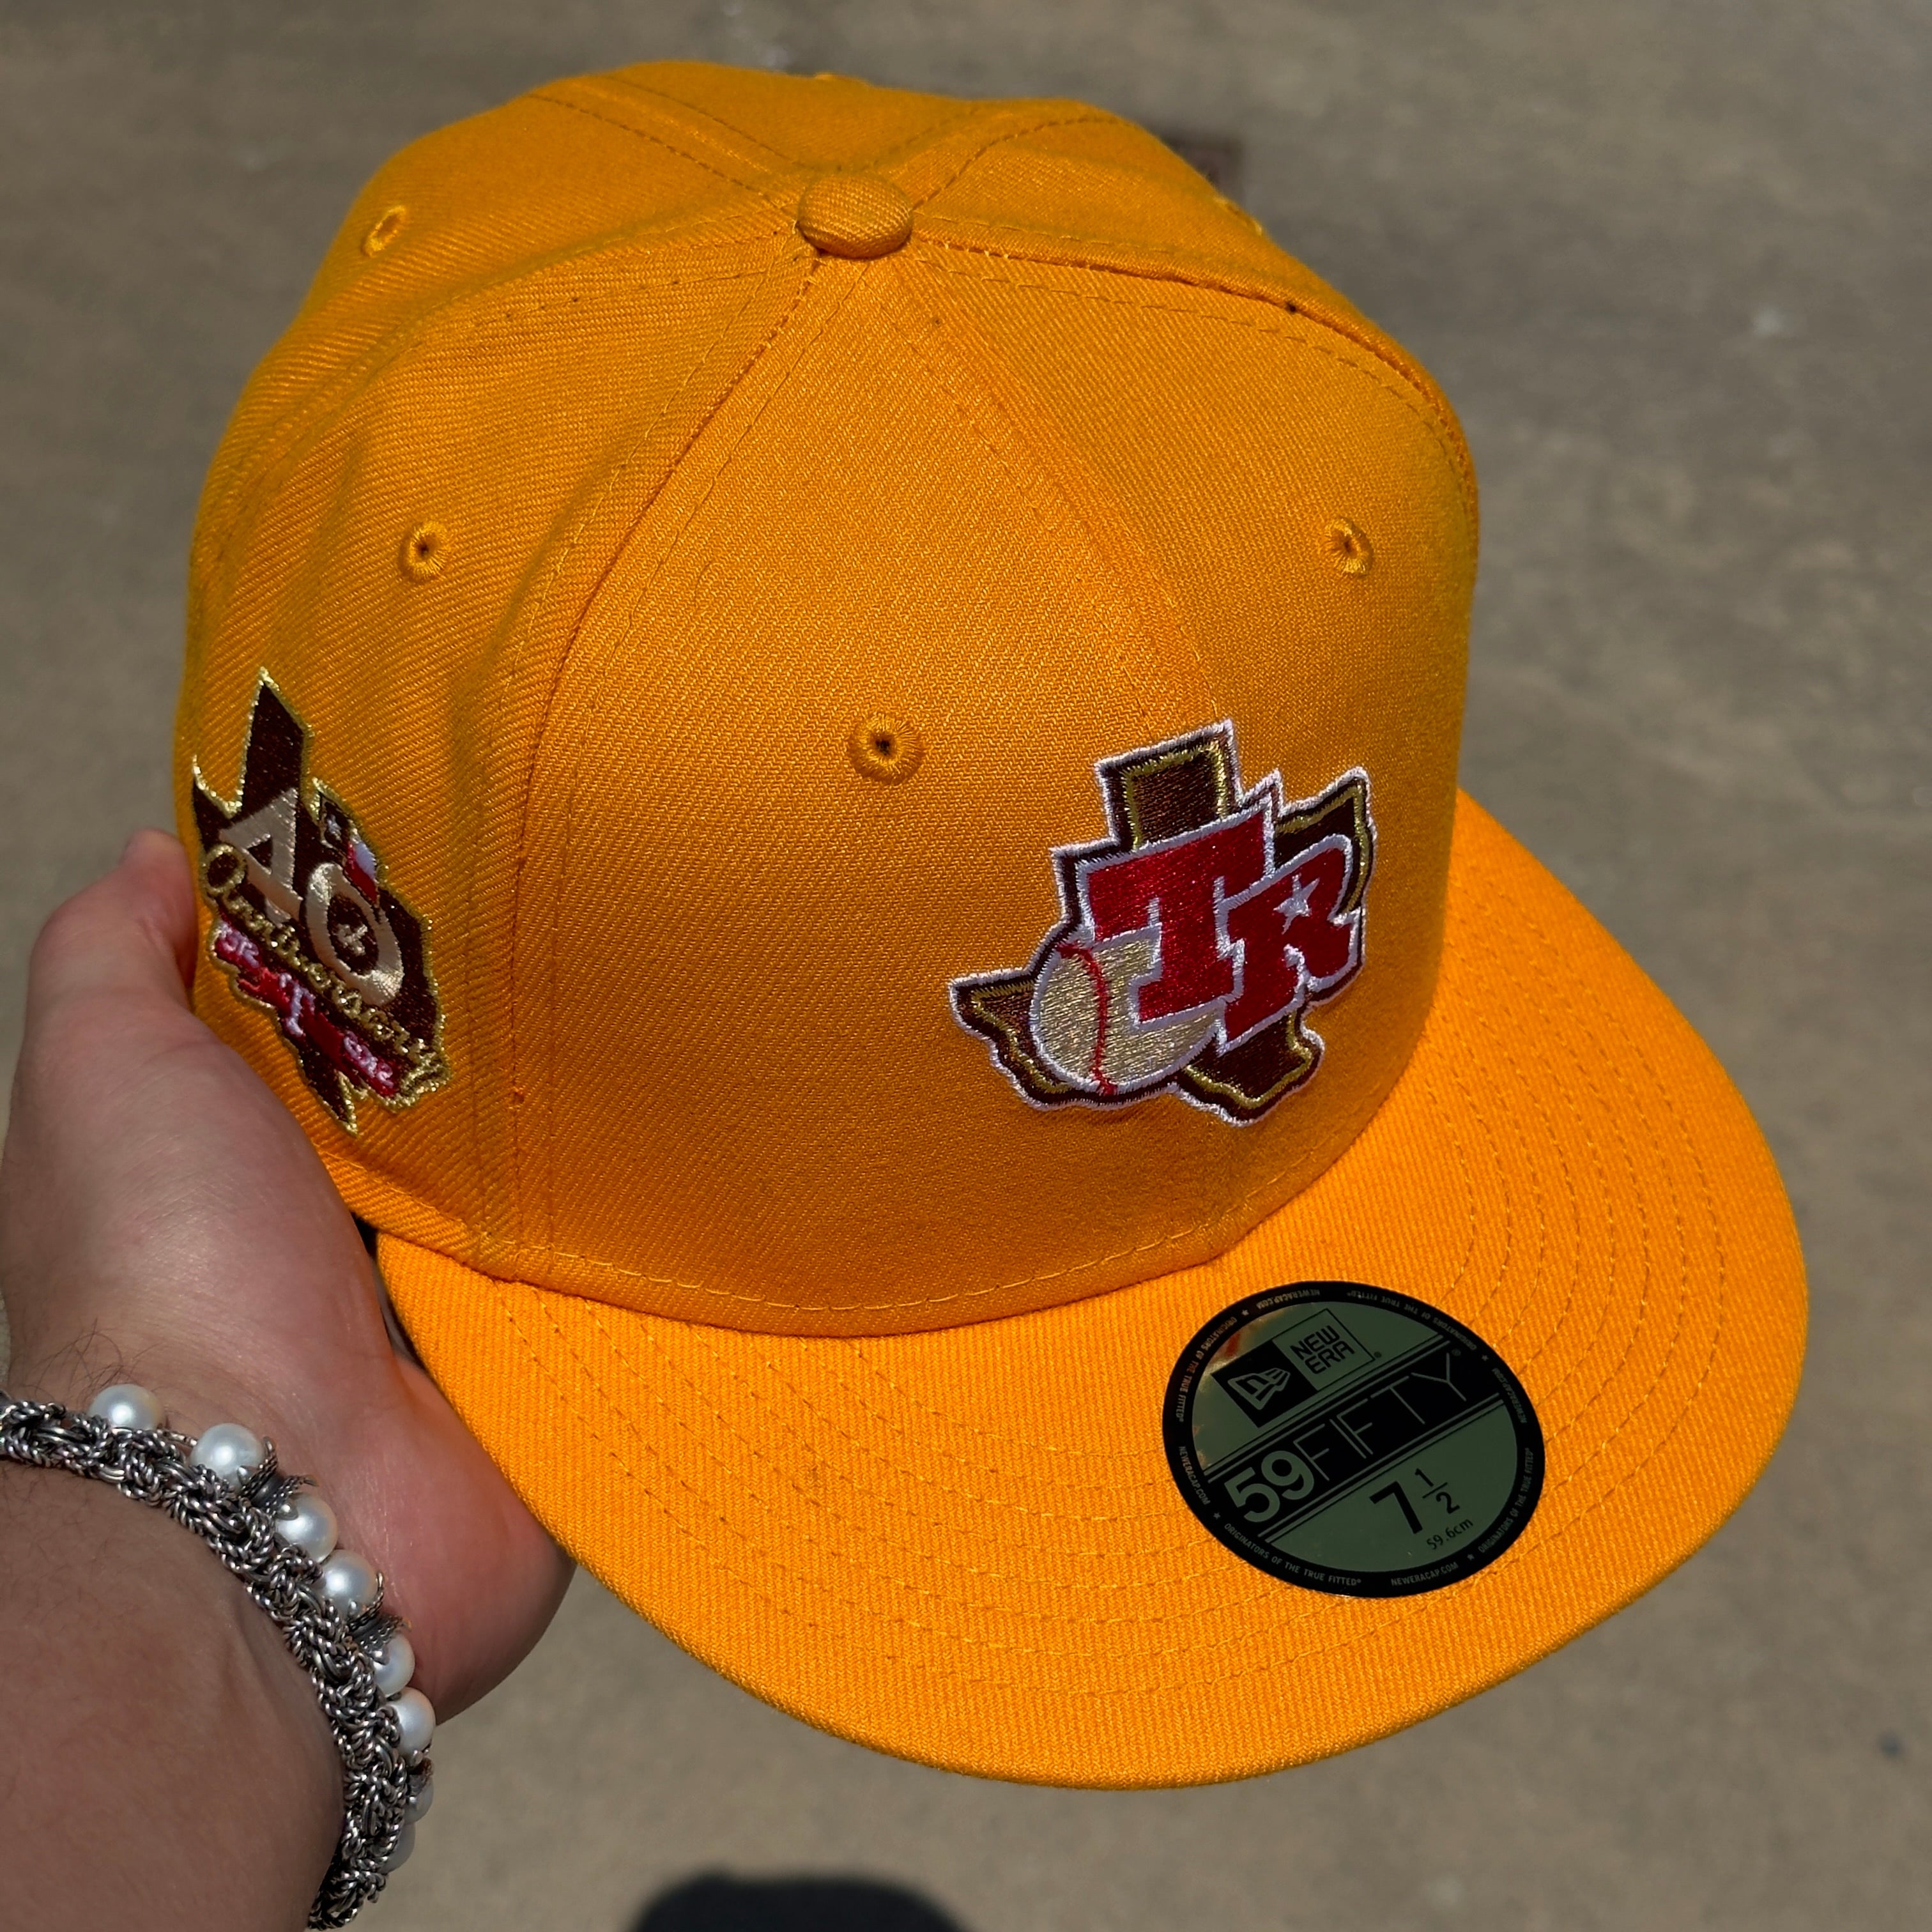 1/2 NEW Yellow Dallas Texas Rangers 40th Anniversary Hatclub 59fifty New Era Fitted Hat Cap